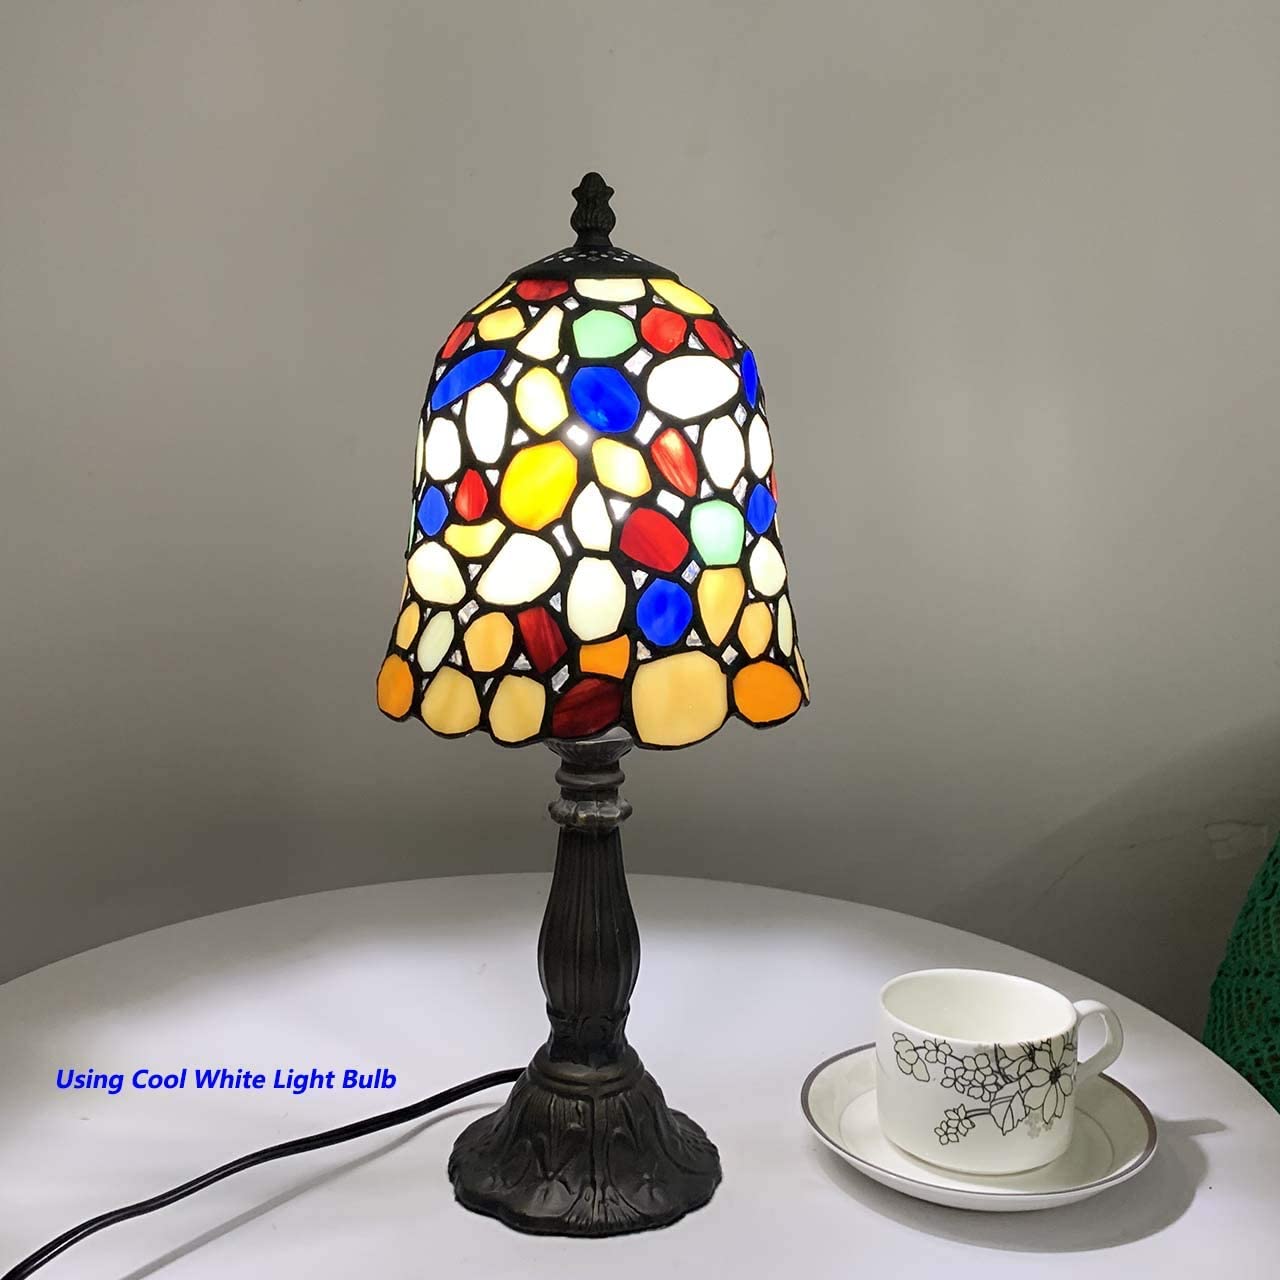 SHADY L10729 Colored Cobblestone  Style Stained Glass Table Lamp with 6-inch Wide Lampshade  Multi-Colored  15 inch Tall